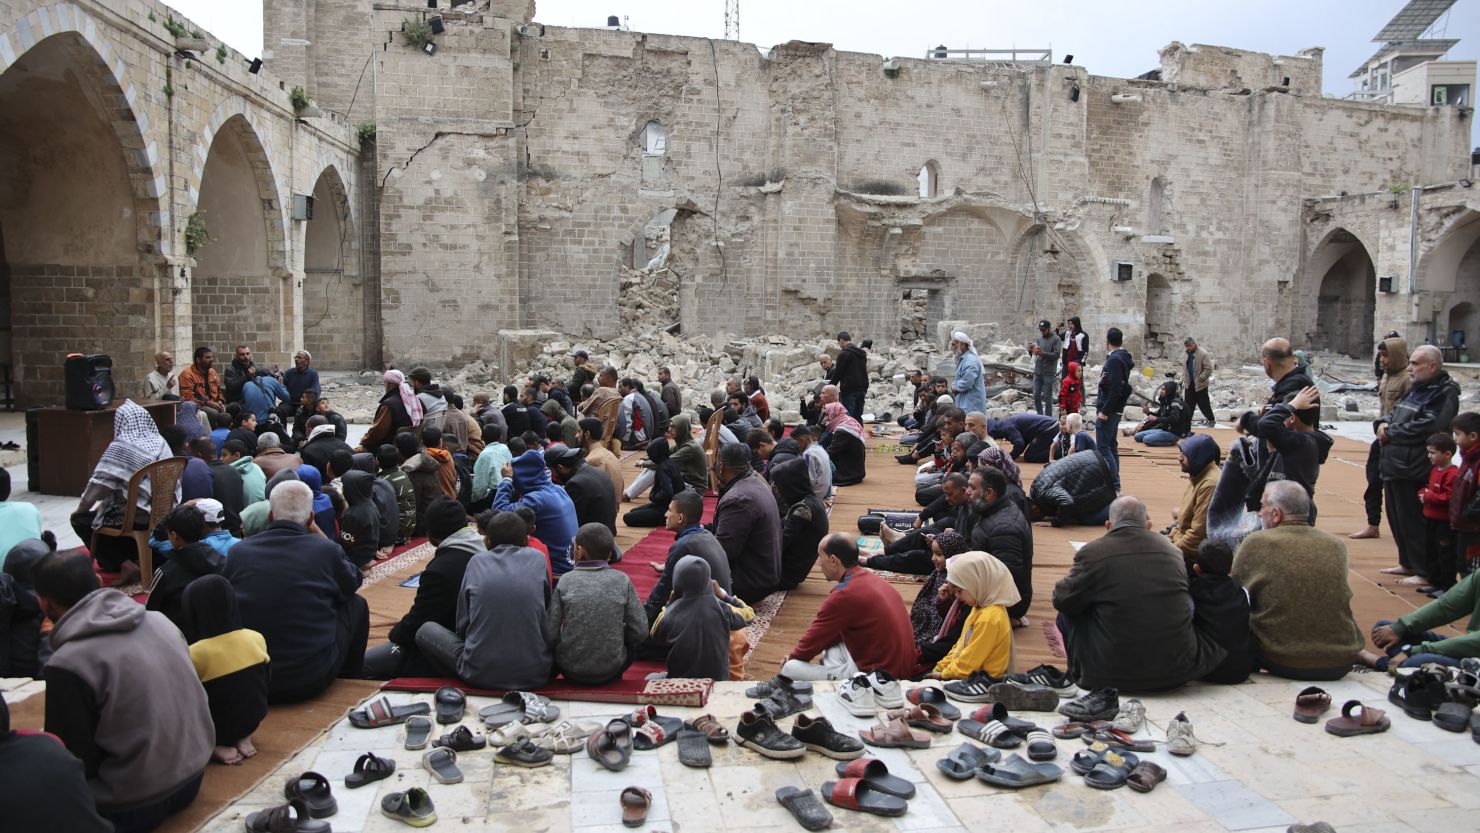 Palestinians seek solace amidst the ruins on somber Eid observance (Credits: AFP)